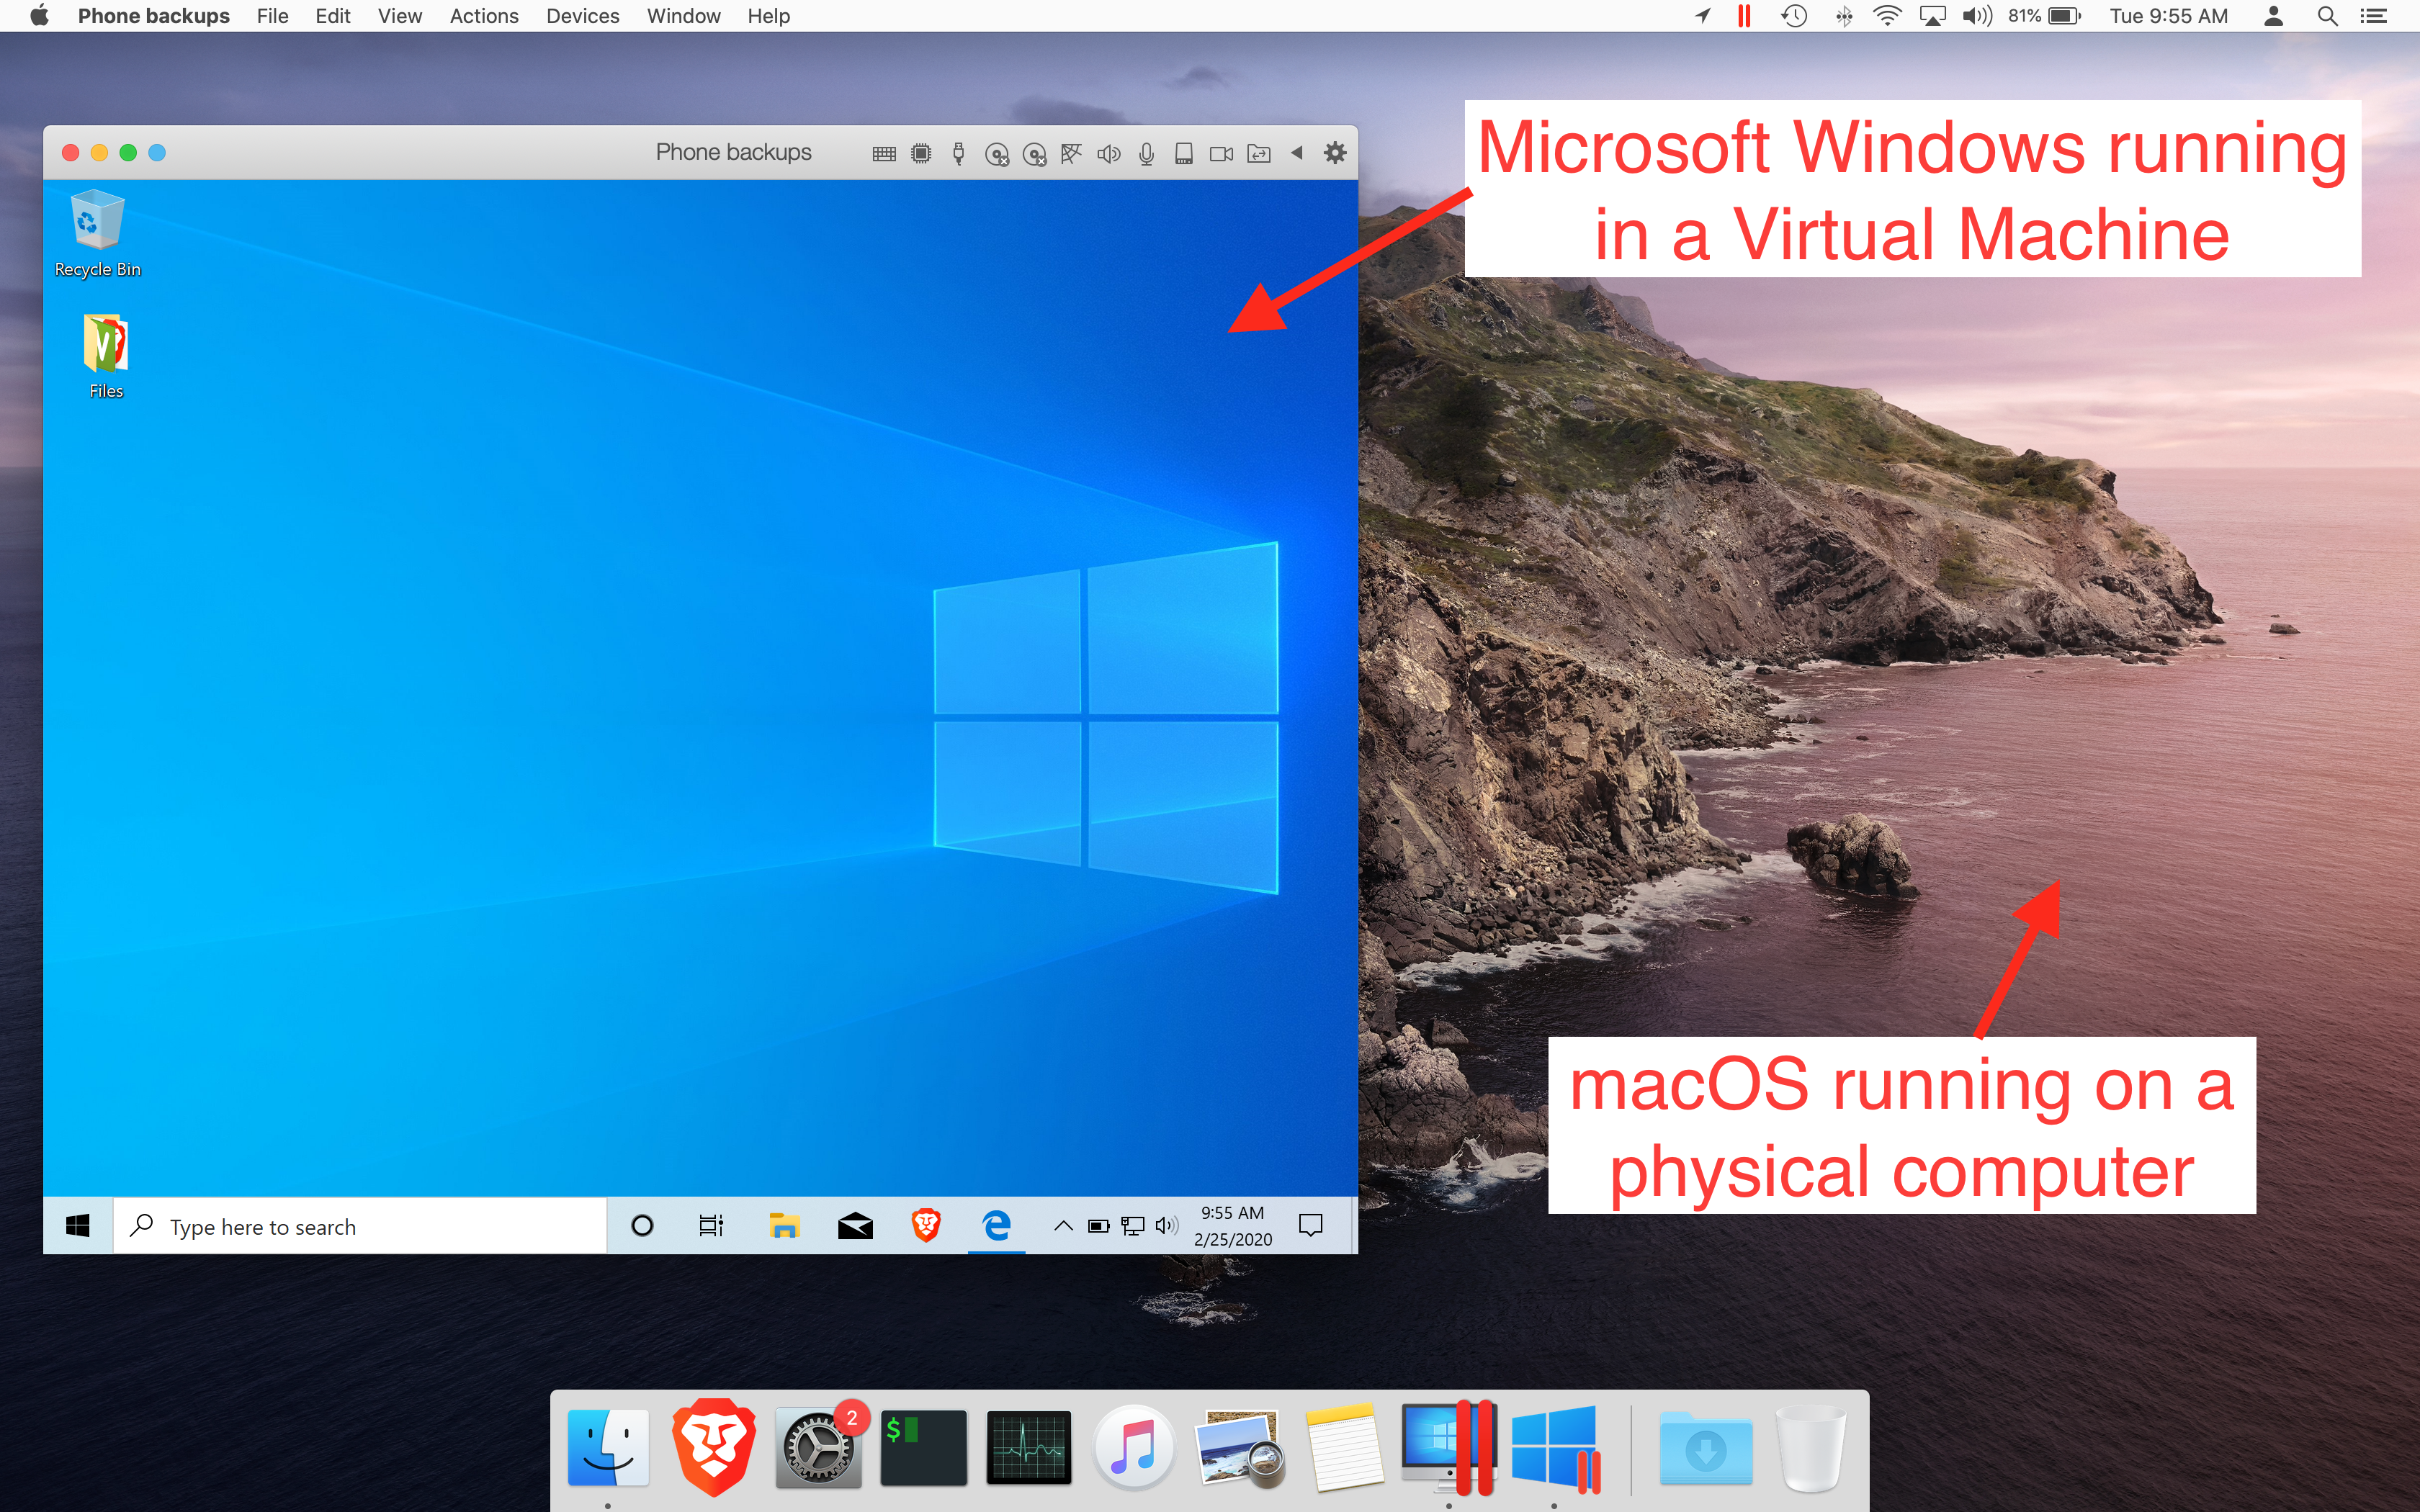 Image of Microsoft Windows running on a virtual machine, which is running on macOS, which is running on a physical compuetsr